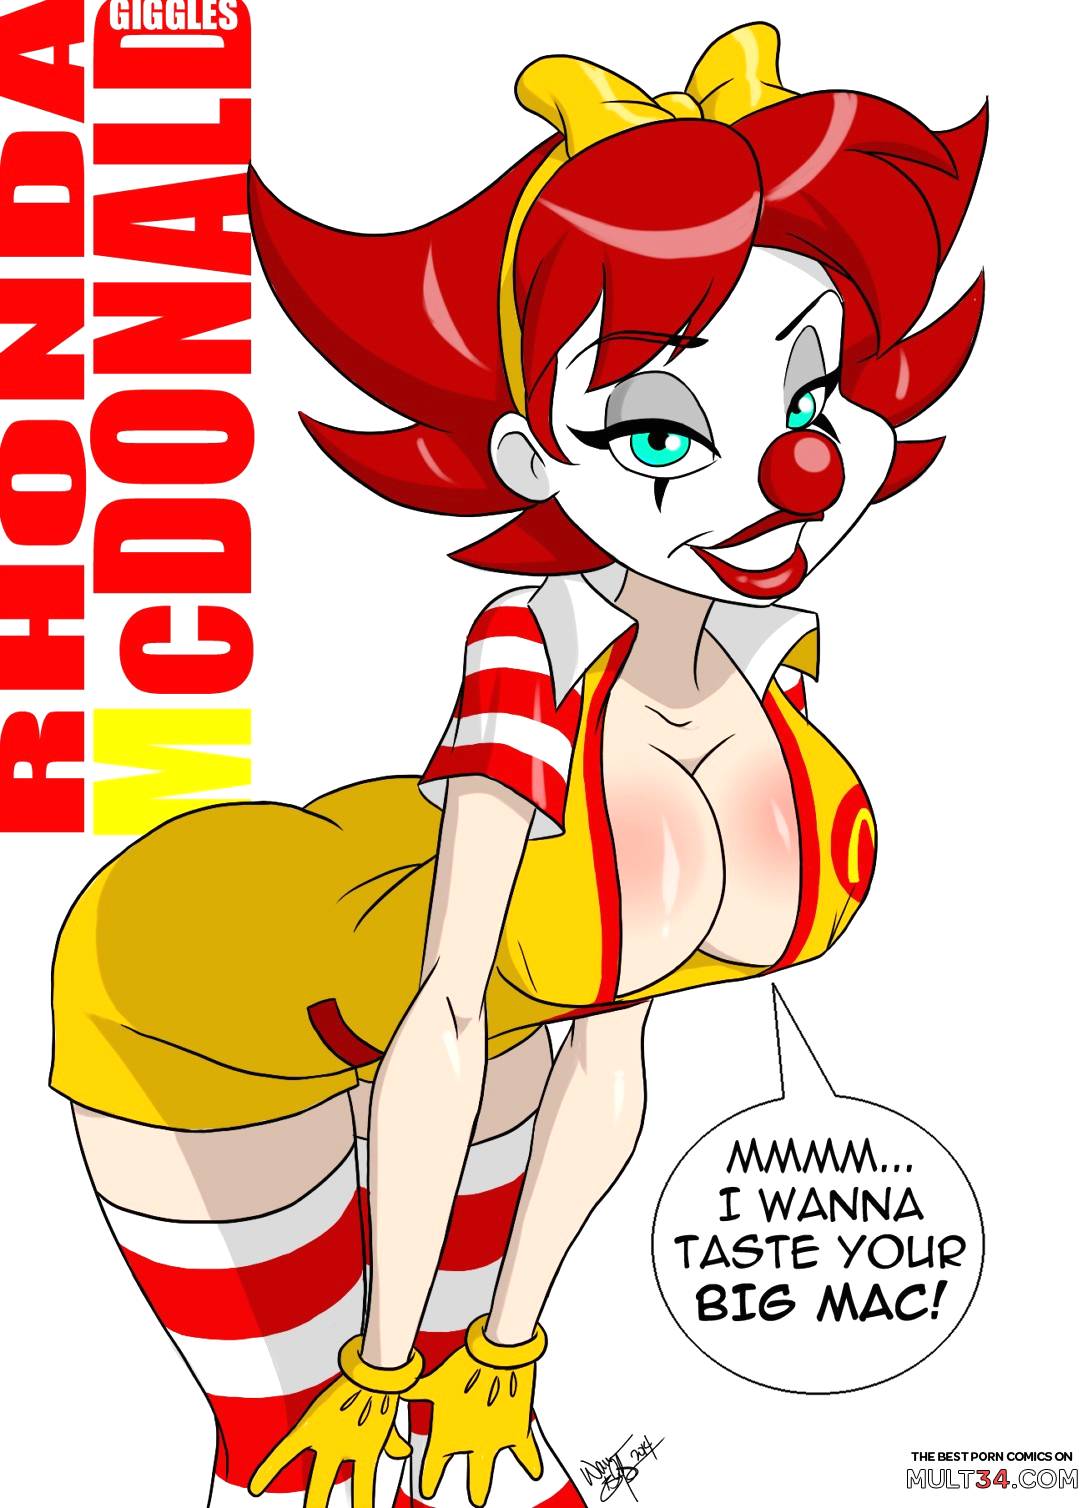 Giggles The Slutty Clown page 13